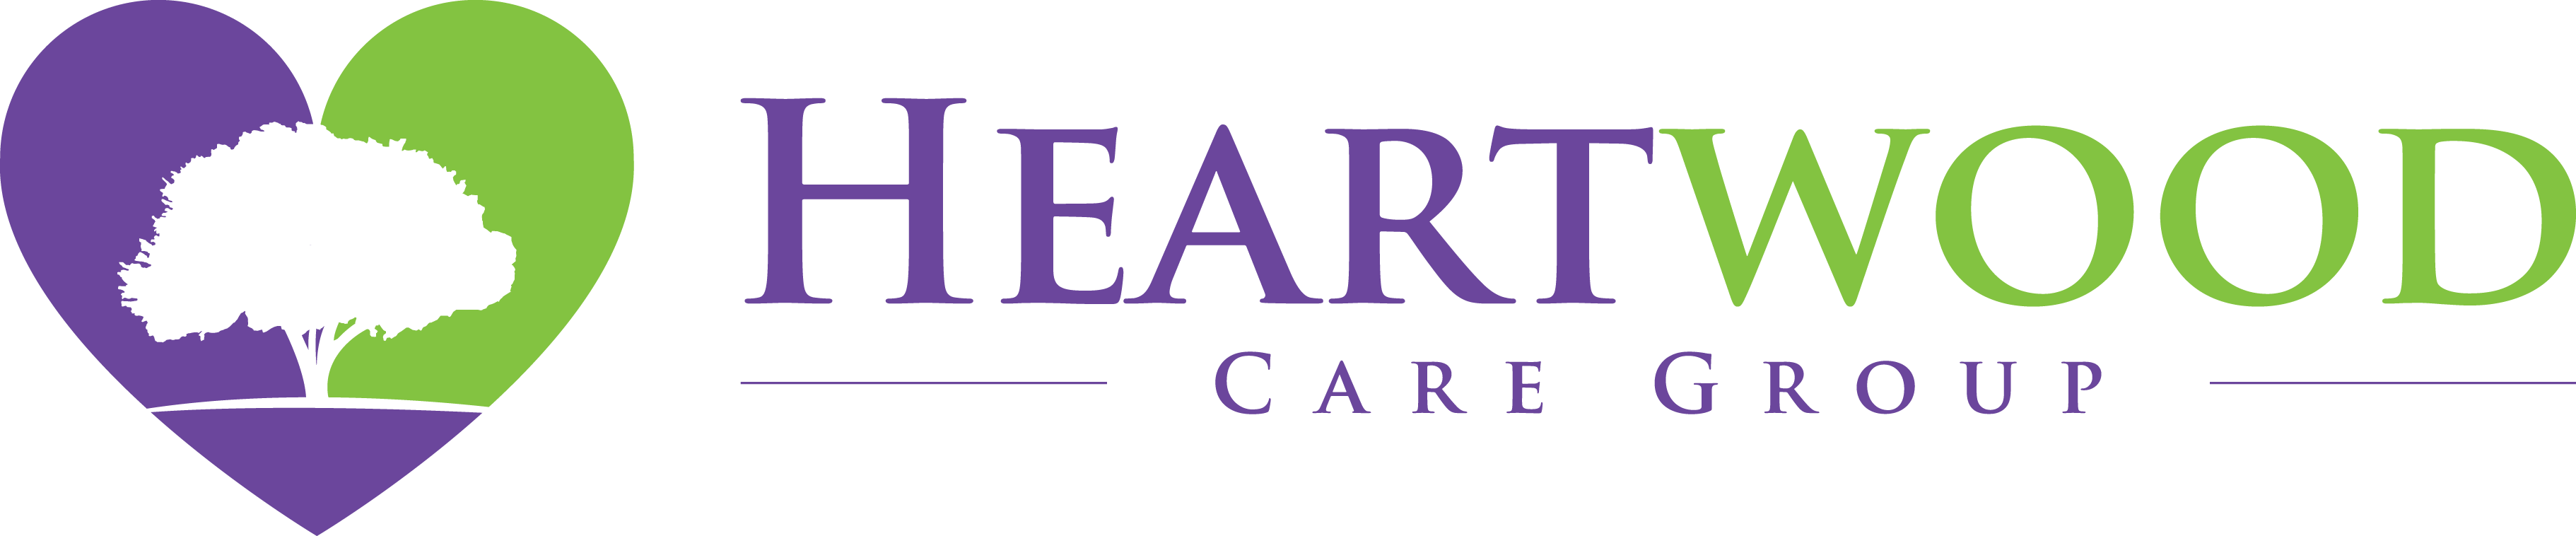 Heartwood Care